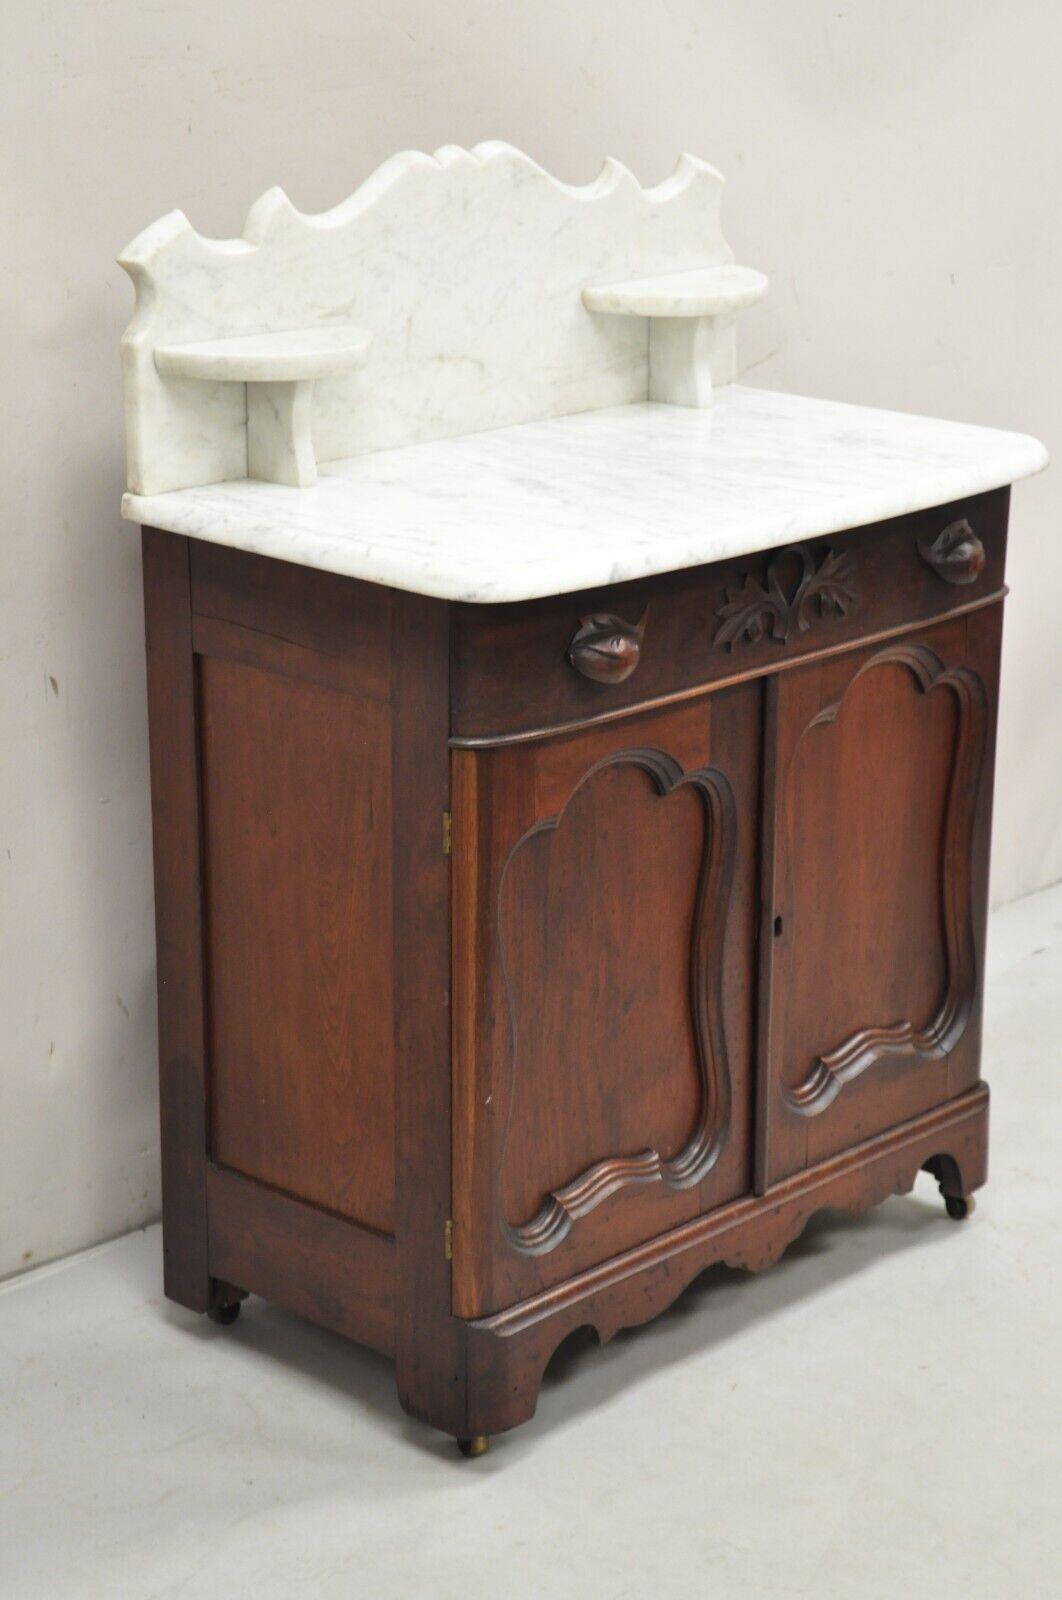 Antique Eastlake Victorian Marble Top Backsplash Walnut Washstand Commode. Item featured carved marble backsplash with 2 small shelves, fruit carved drawer pulls, rolling casters, beautiful wood grain, very nice antique commode, unlocked, no key.